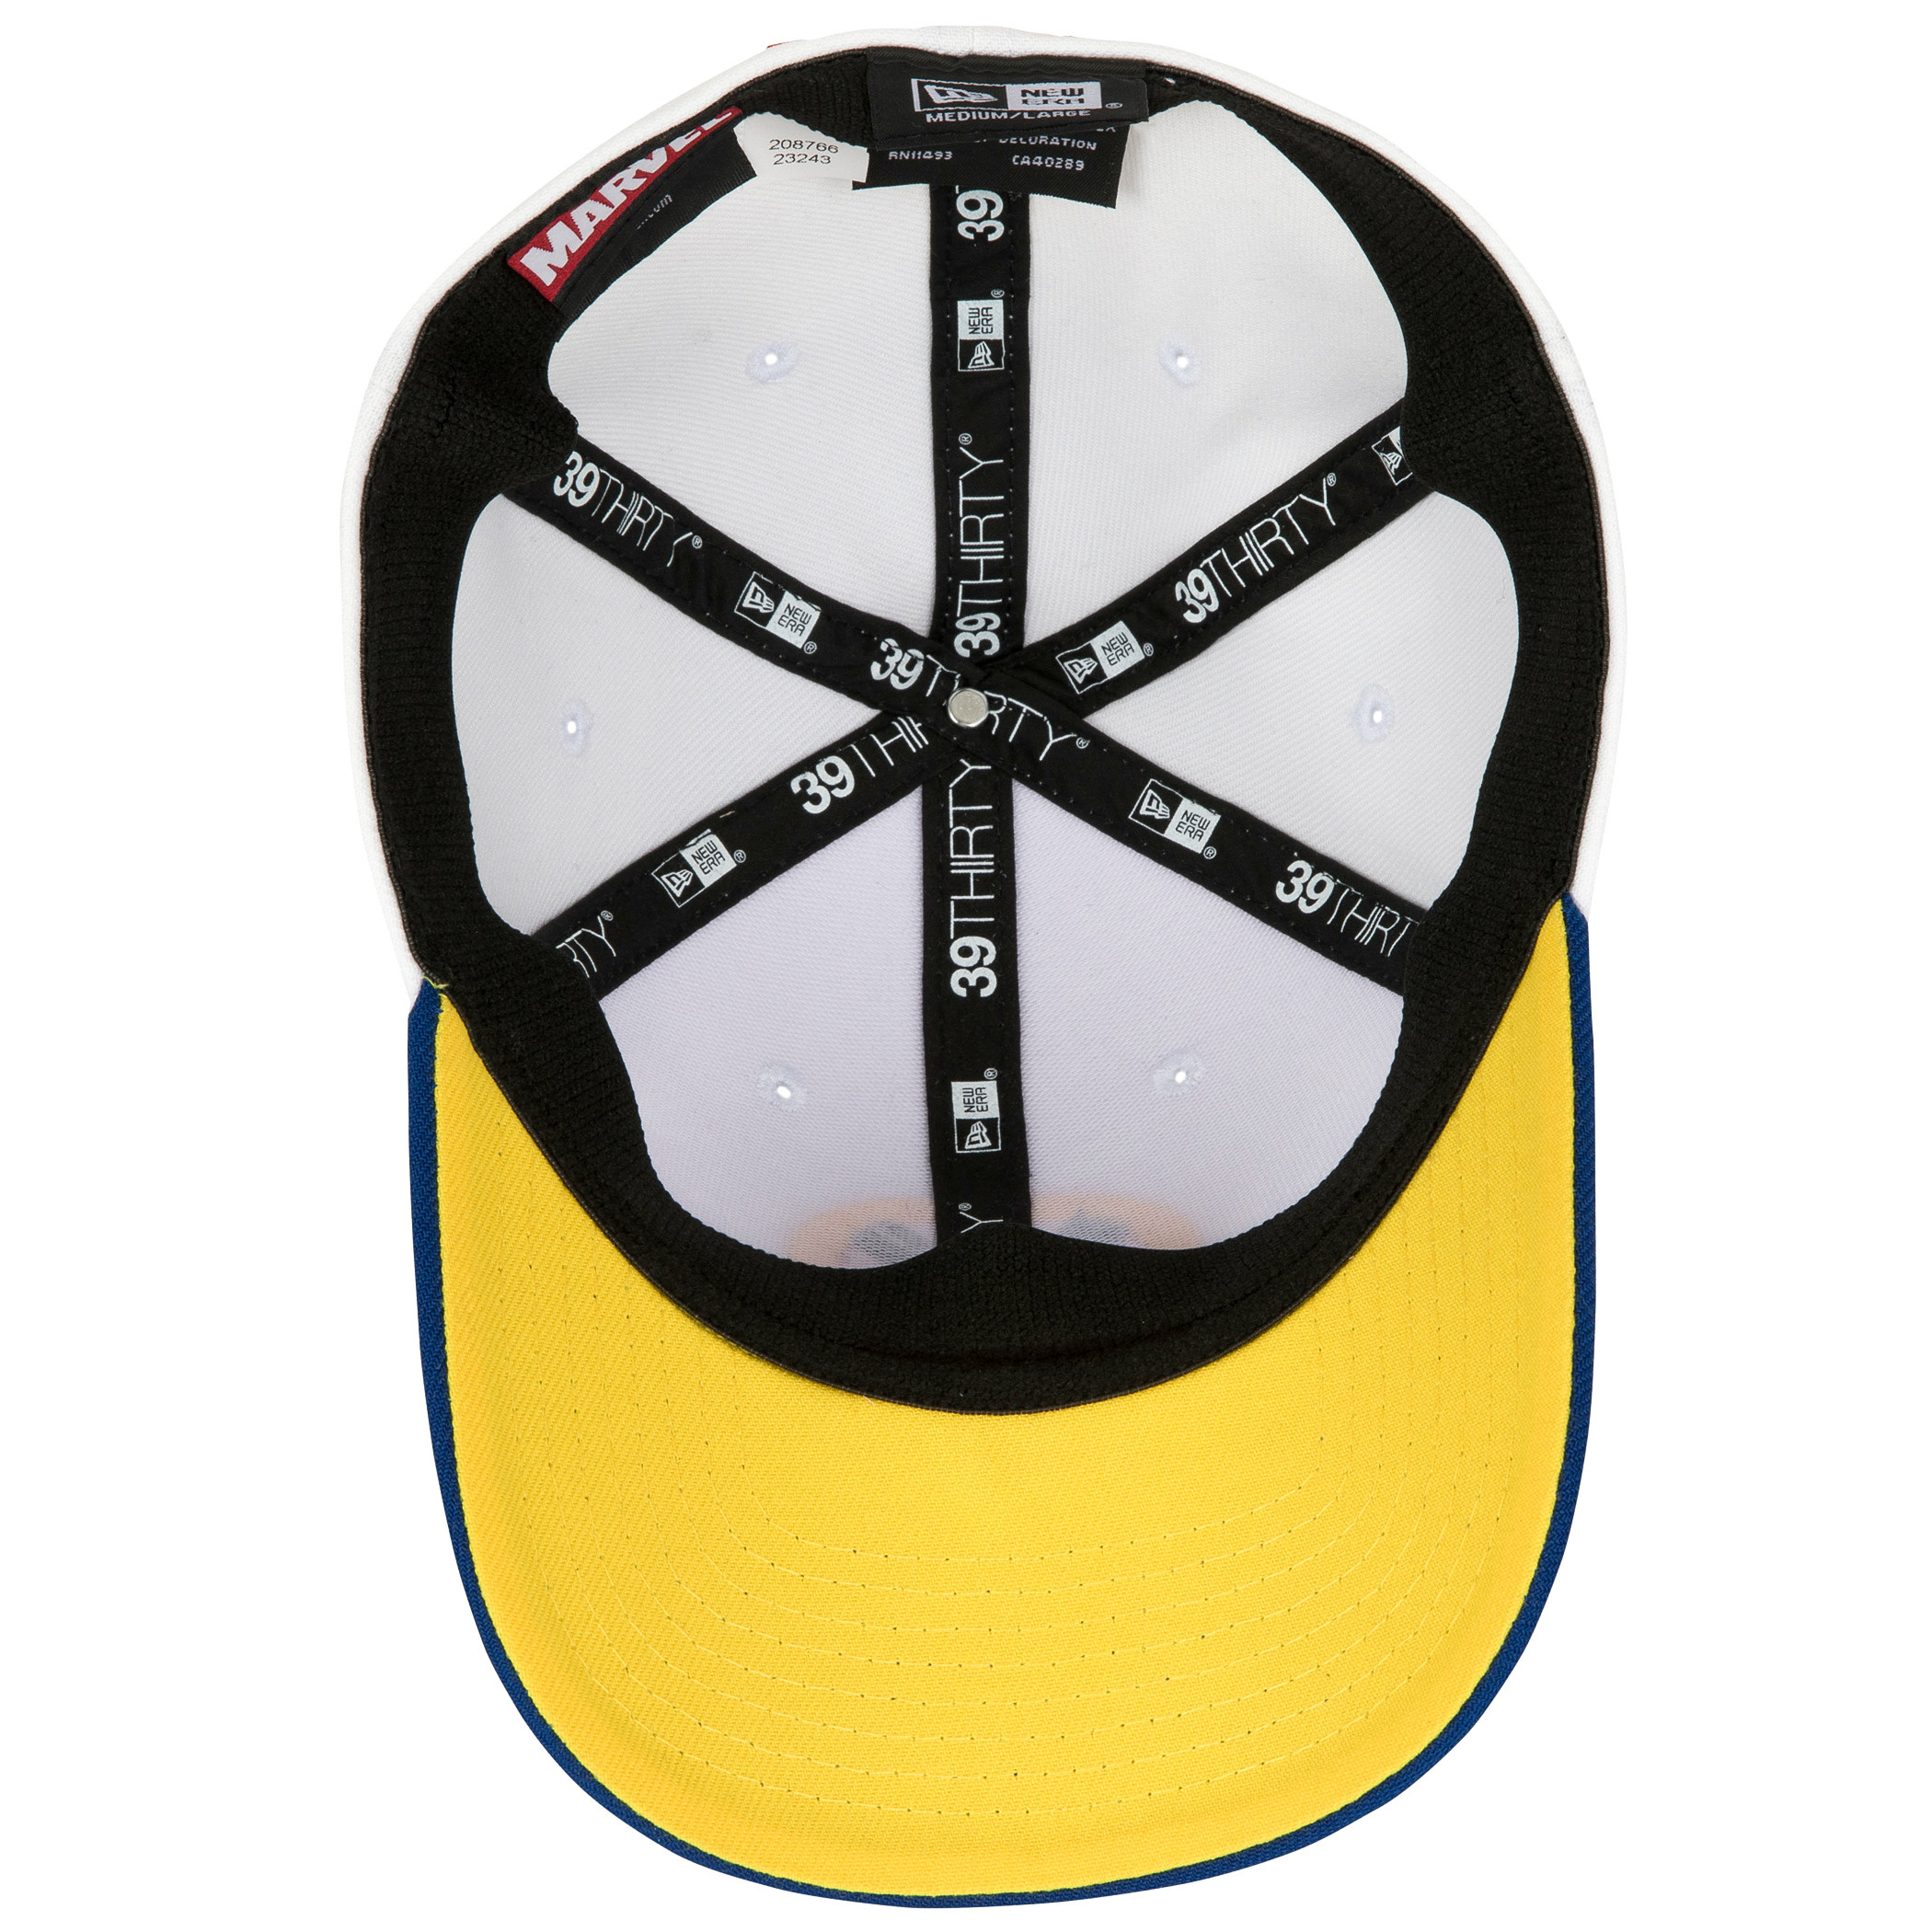 X-Men Logo Home Colors New Era 39Thirty Fitted Hat